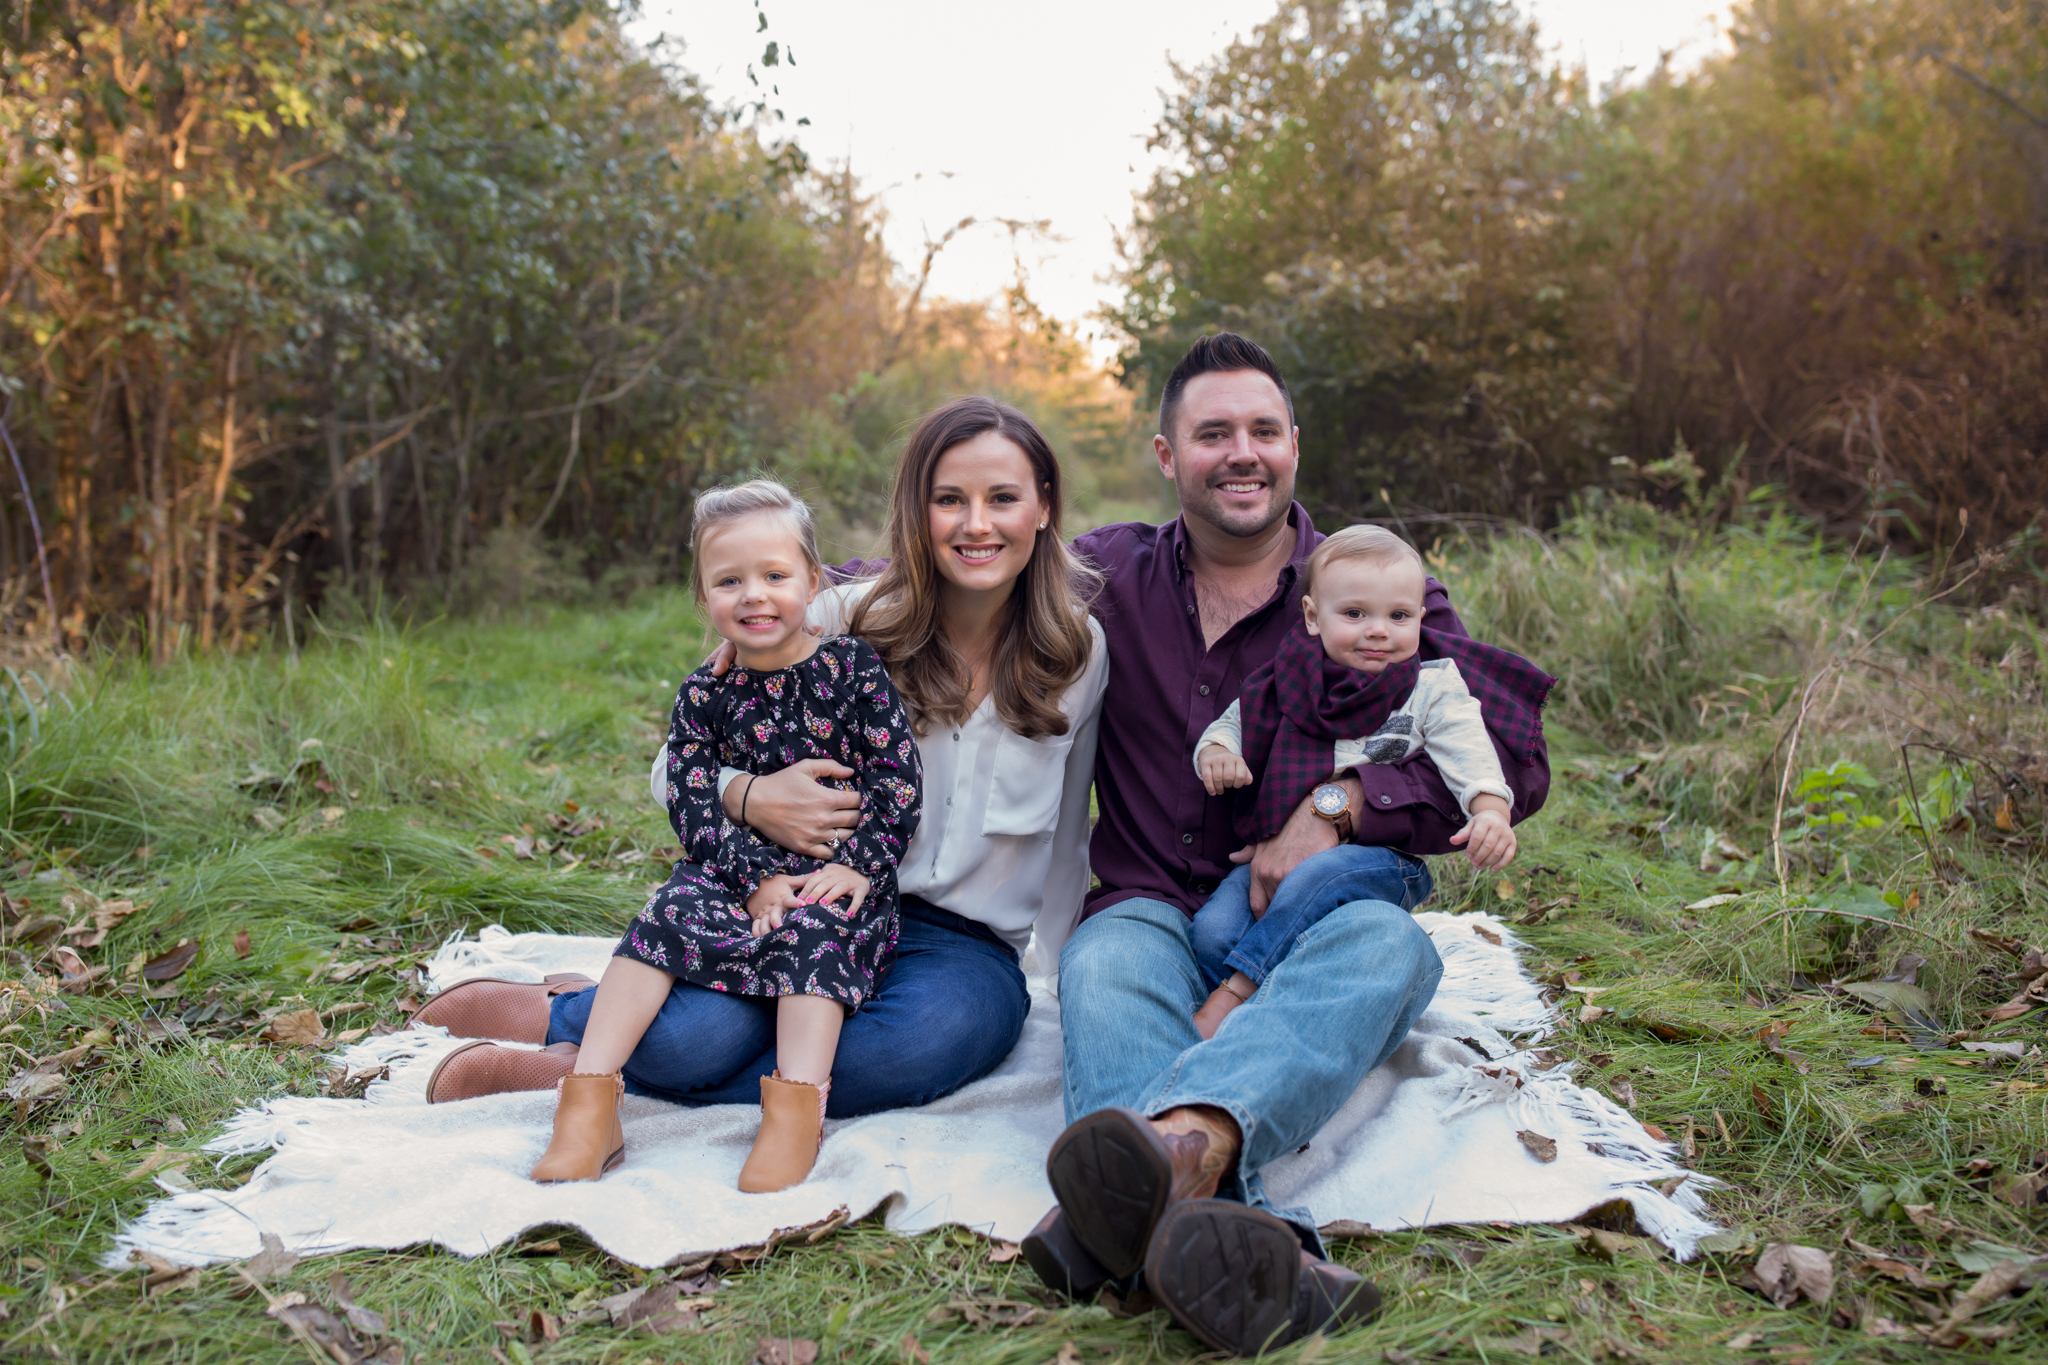 Hailey Family Fall Session, 2 kinds, family poses with young kids, Cara Peterson Photography Rockford IL-1.jpg